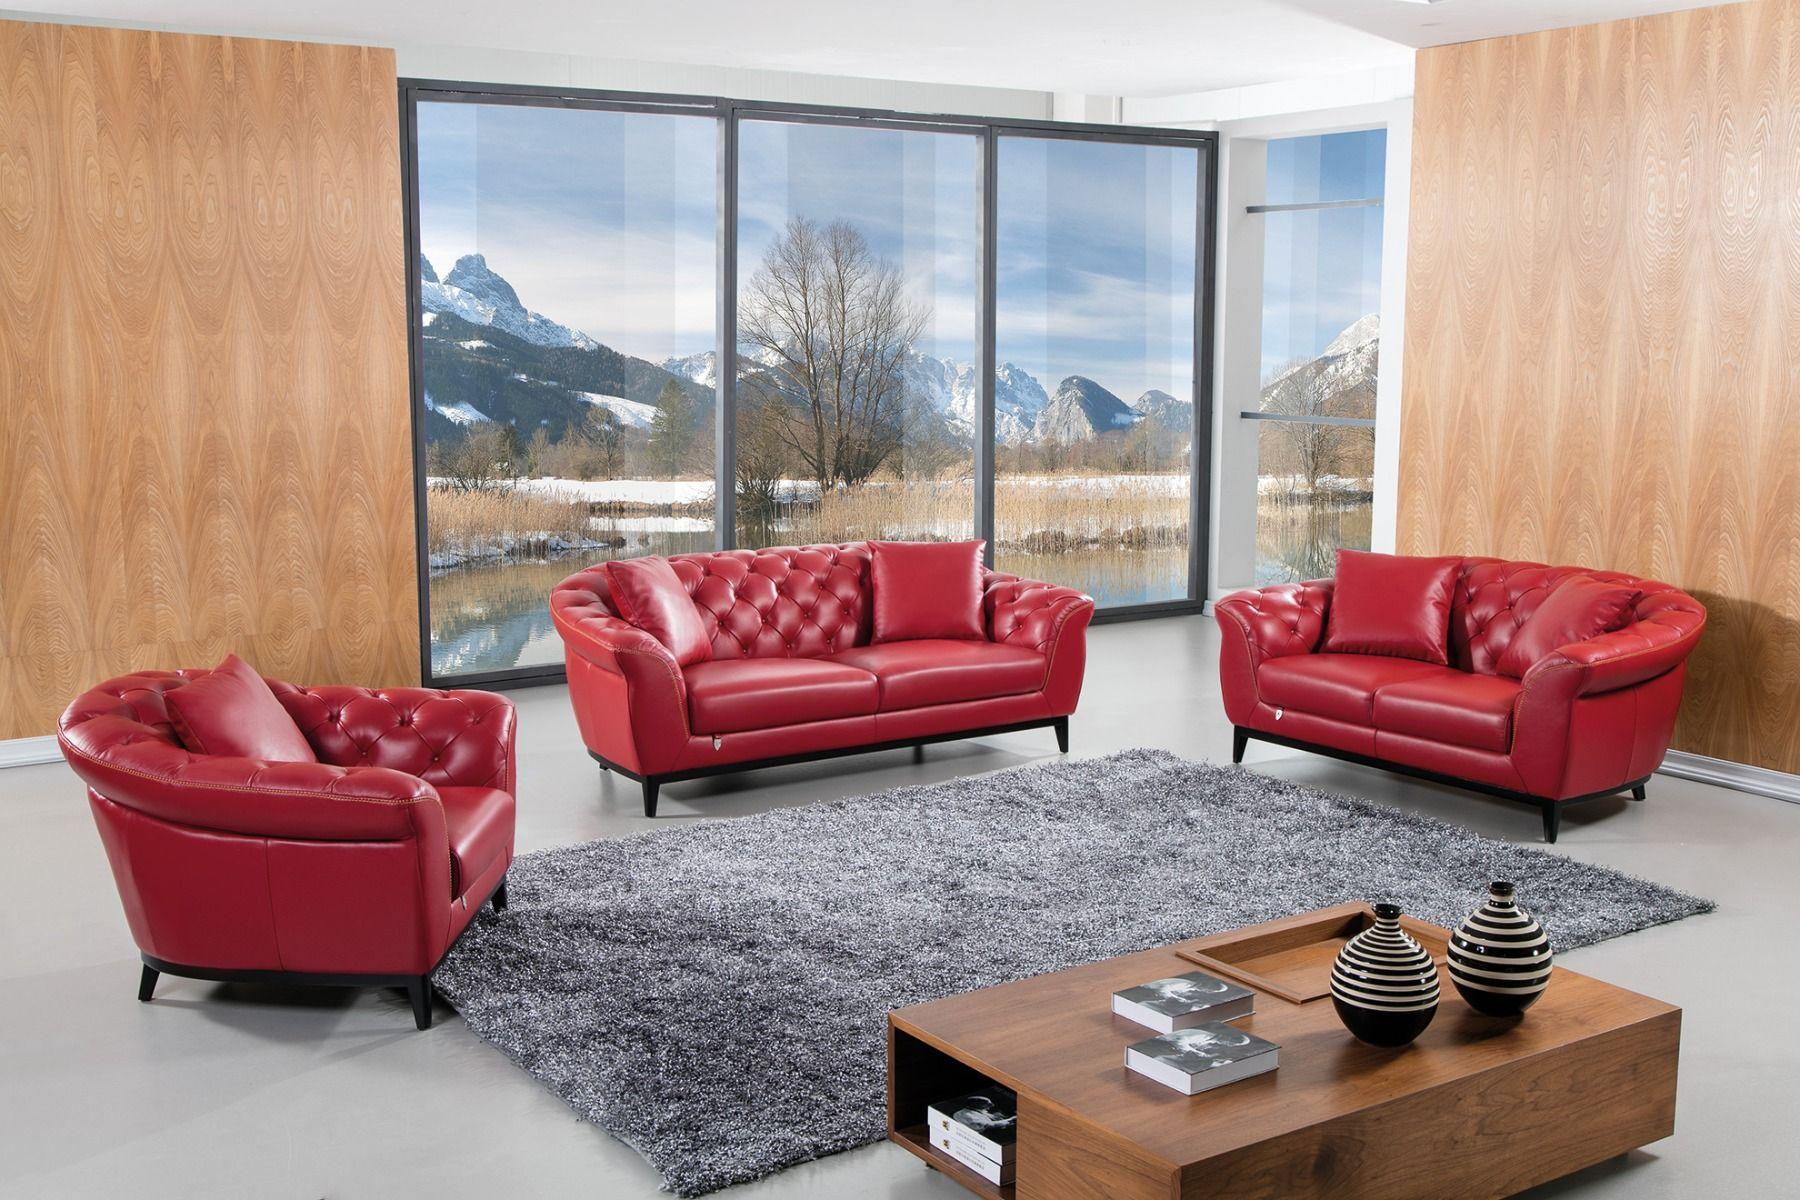 Contemporary, Modern Sofa Loveseat and Chair EK093-RED EK093-RED-Set-3 in Red Top grain leather